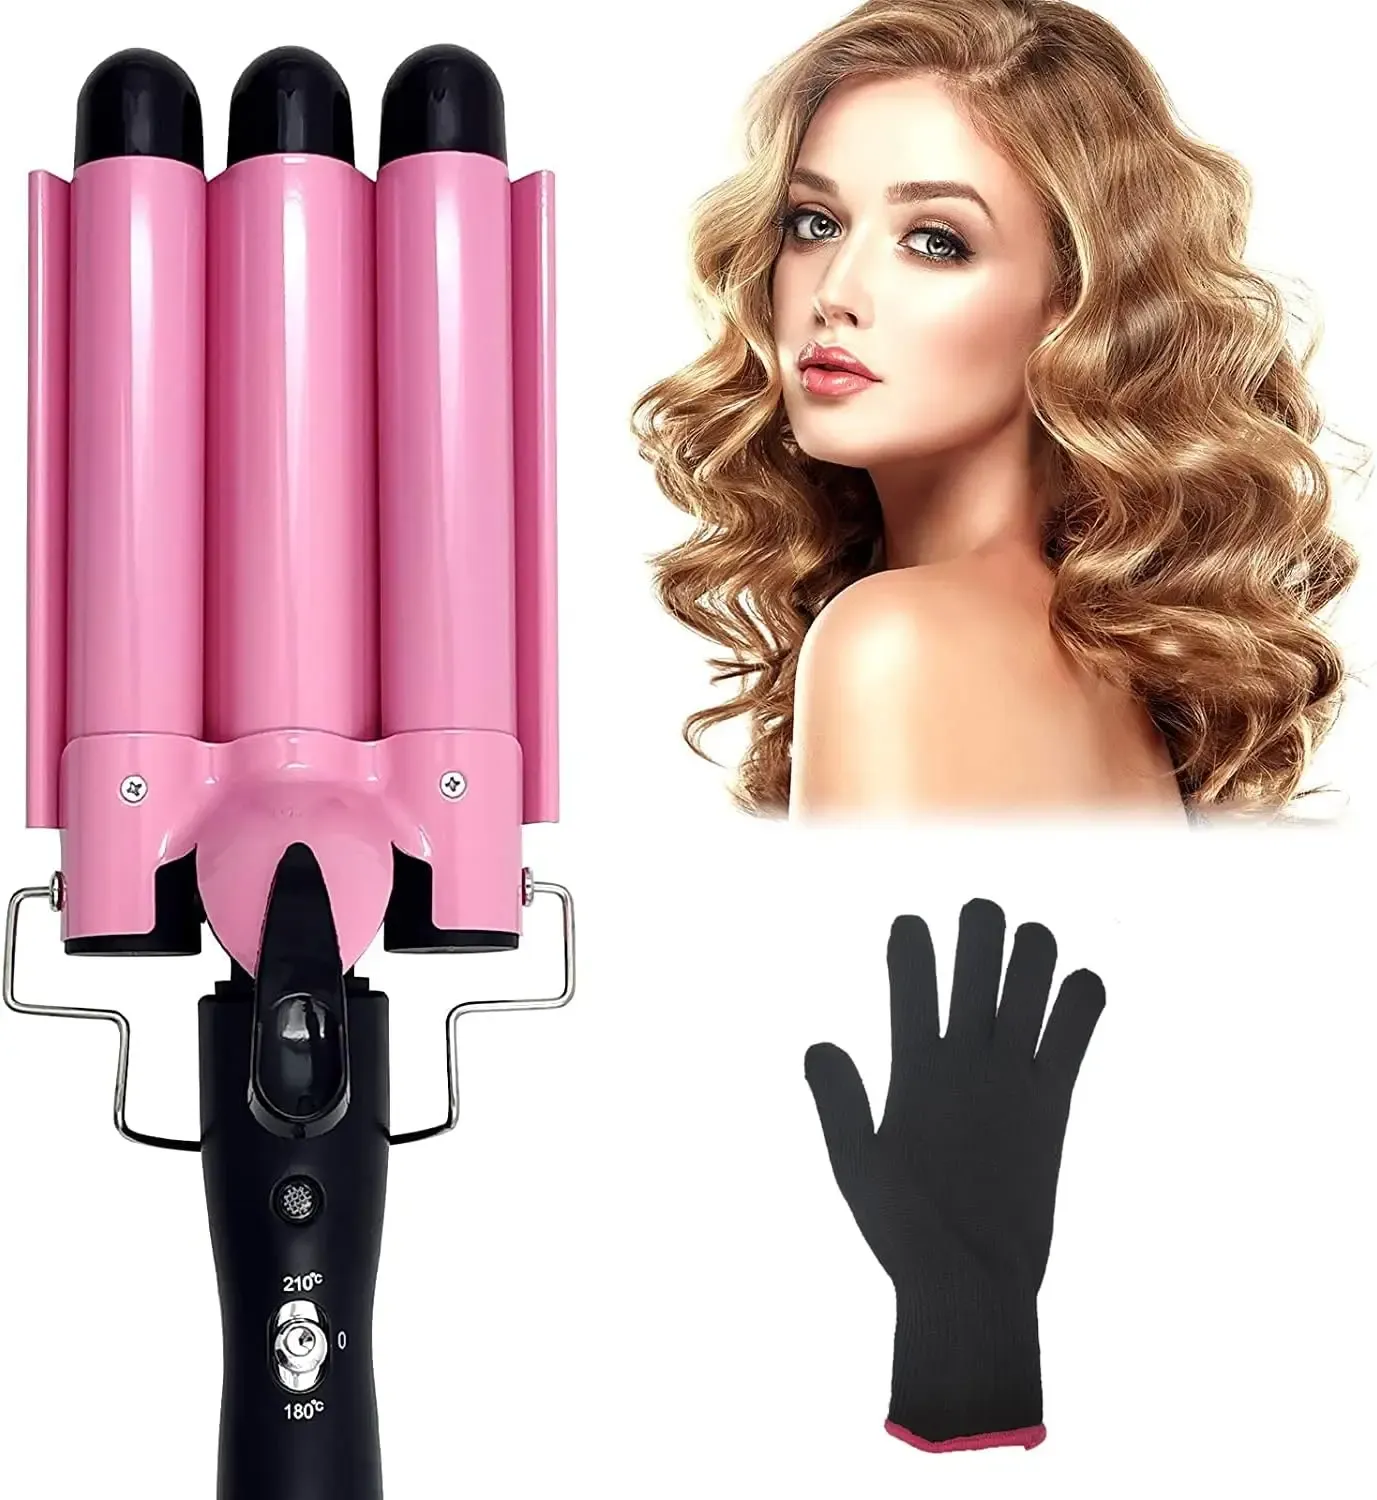 Straighteners 3 Barrel Curling Iron Hair Crimper Portable Temperature Adjustable Ceramic Wave Iron Wand Curler DIY Curly Hair Stylin